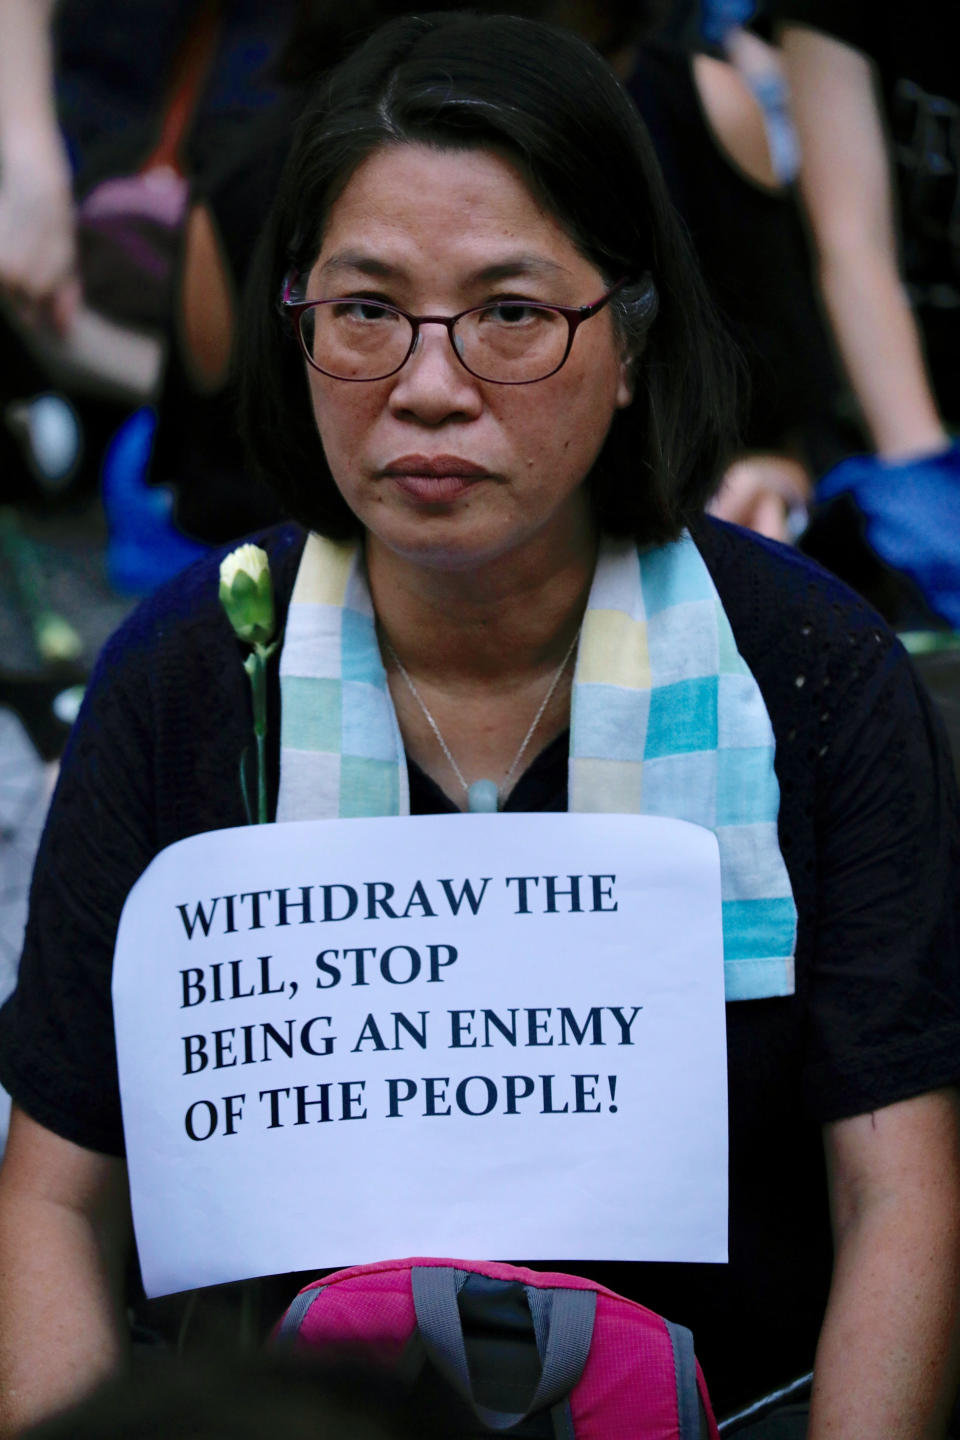 A woman joins hundreds of mothers protesting against the amendments to the extradition law after Wednesday's violent protest in Hong Kong on Friday, June 14, 2019. Calm appeared to have returned to Hong Kong after days of protests by students and human rights activists opposed to a bill that would allow suspects to be tried in mainland Chinese courts. (AP Photo/Vincent Yu)